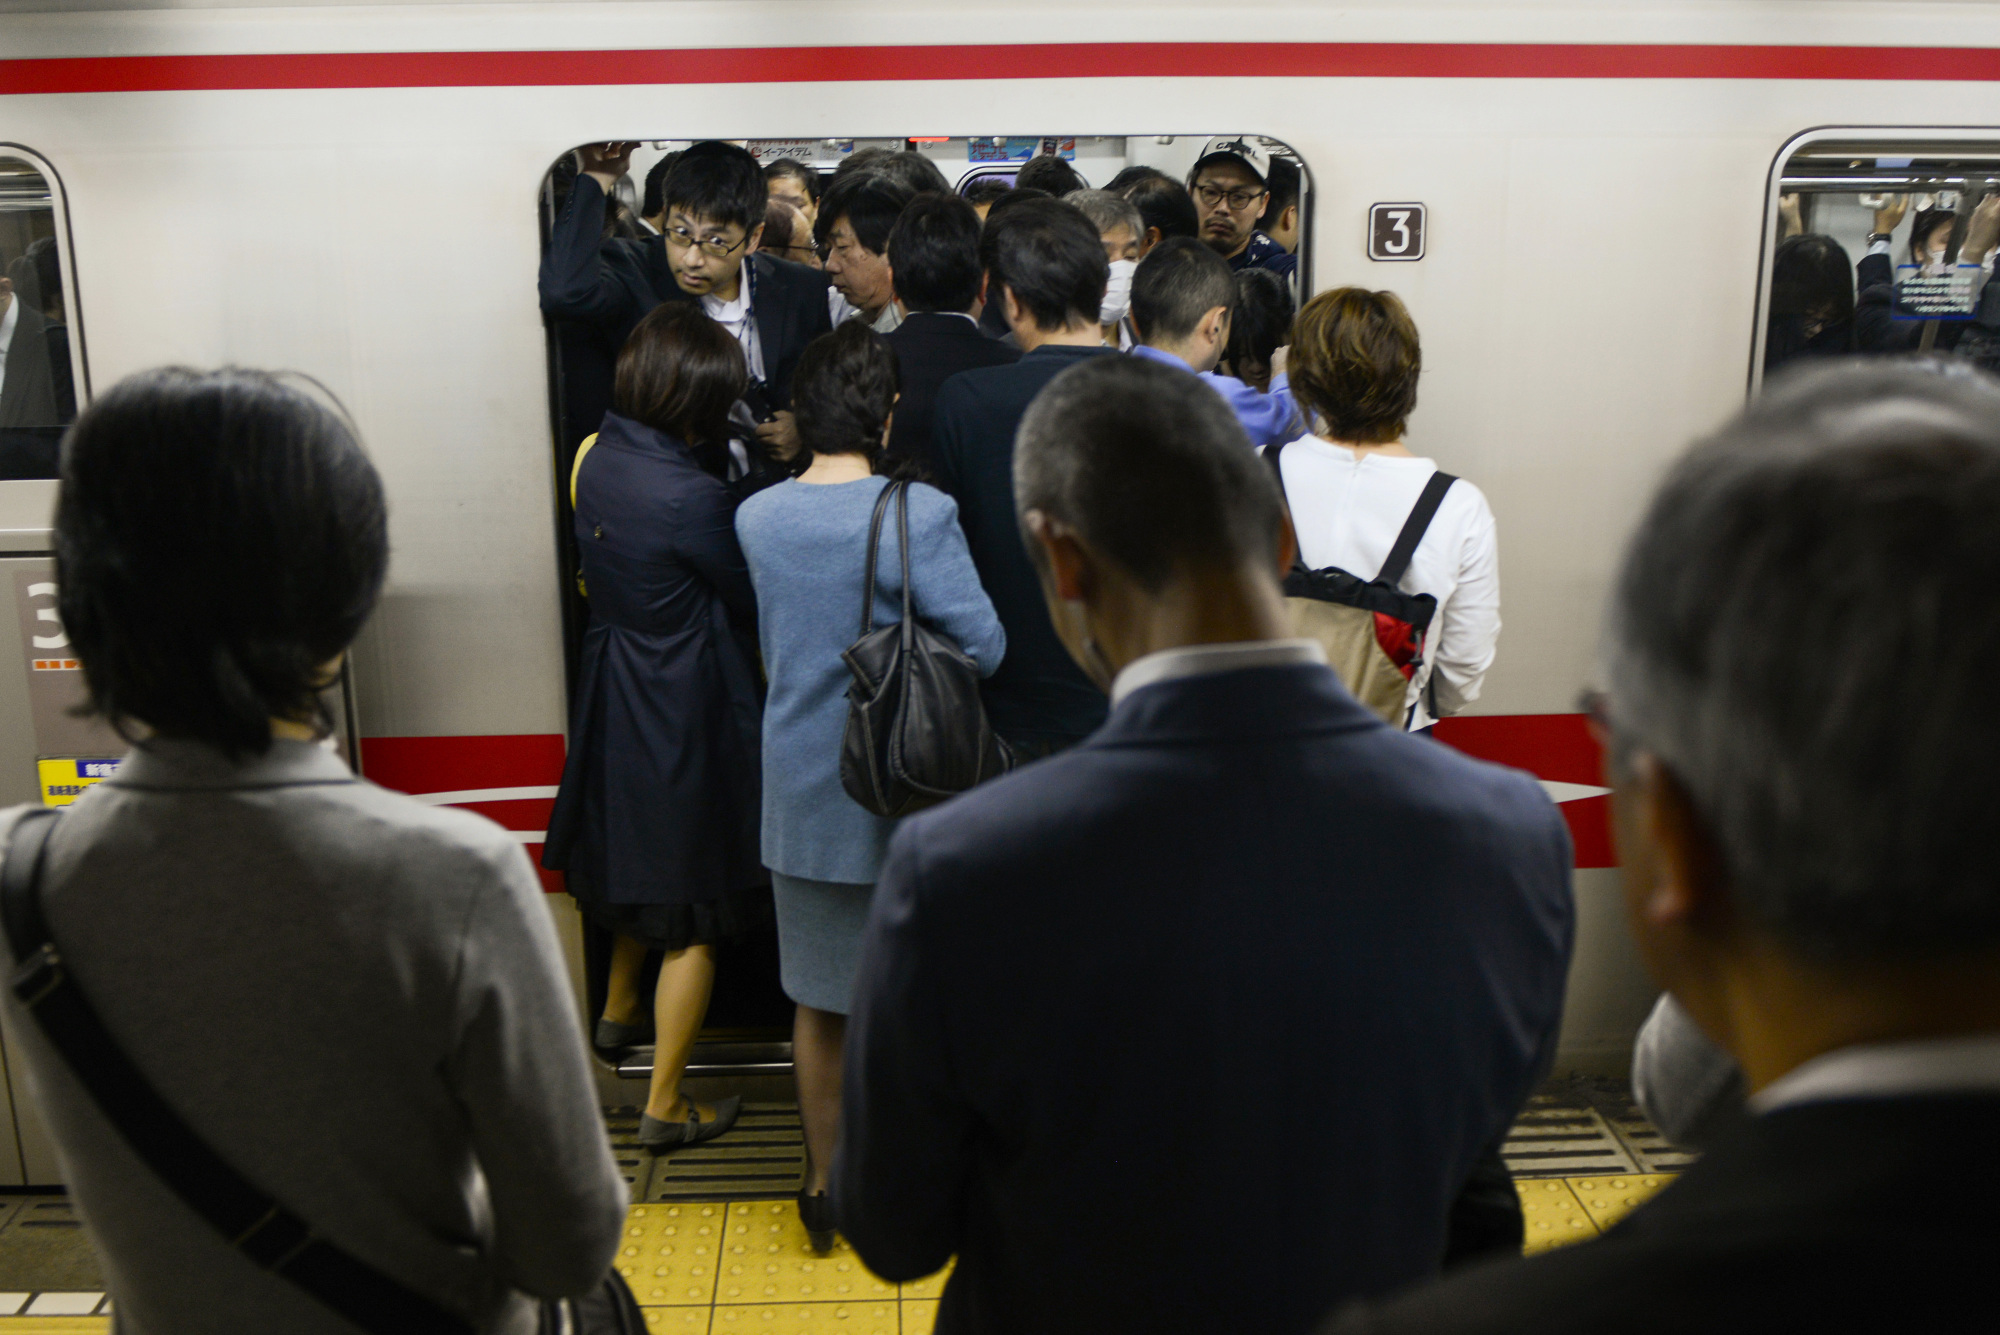 Passengers board a train on the Marunouchi Line. Tokyo launched the Jisa Biz campaign July 9 in a bid to combat jam-packed trains during rush hour. About 740 companies are participating. | BLOOMBERG